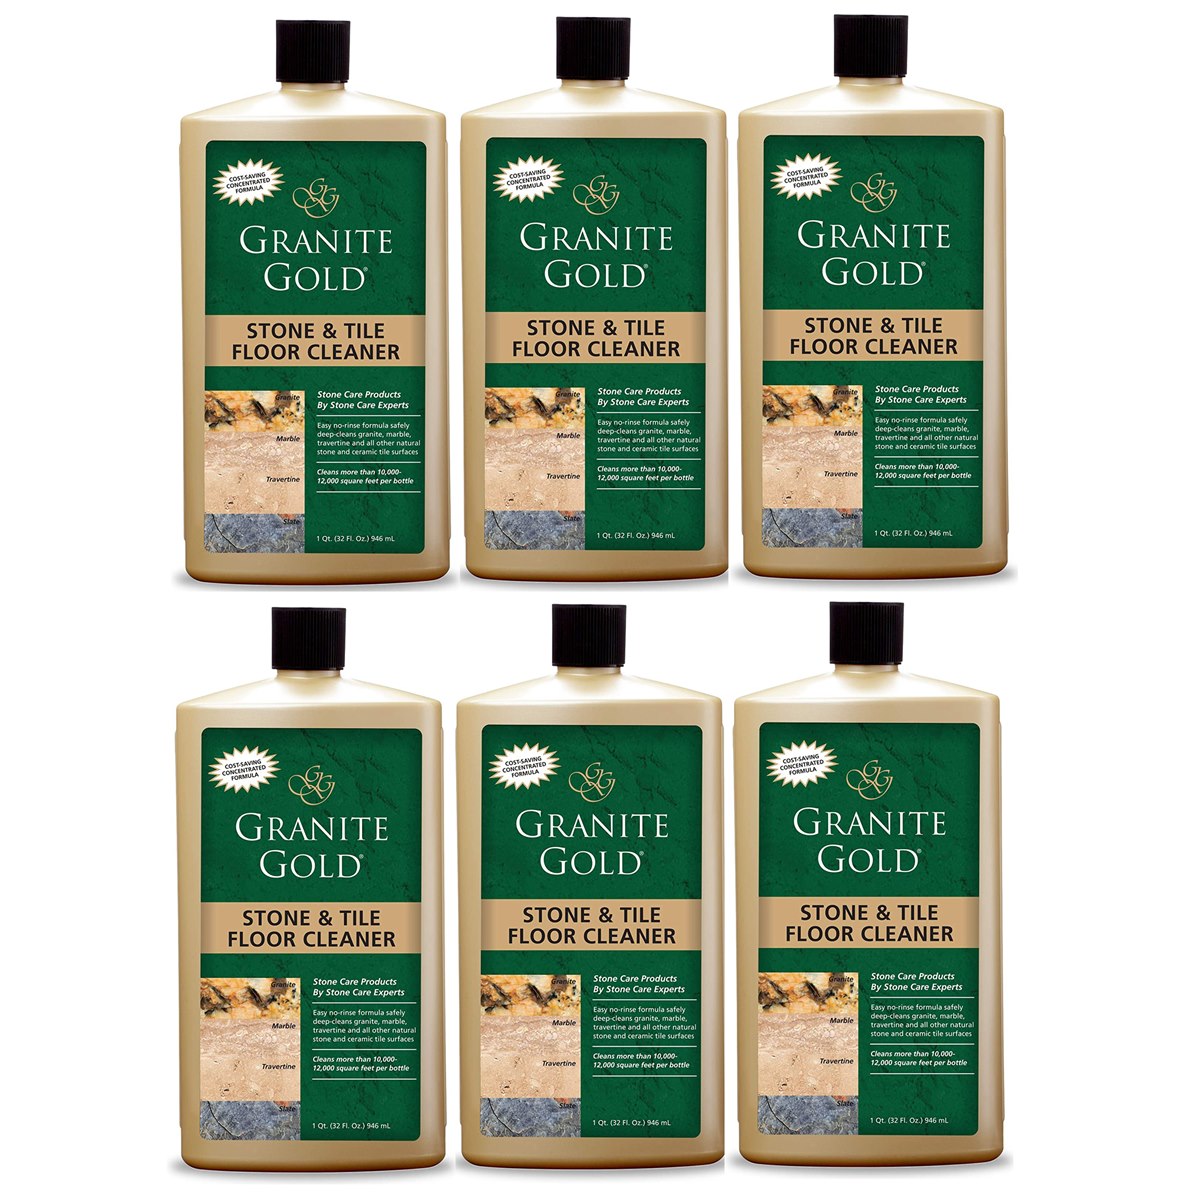 Case of 6 x Granite Gold Stone and Tile Floor Cleaner 946ml